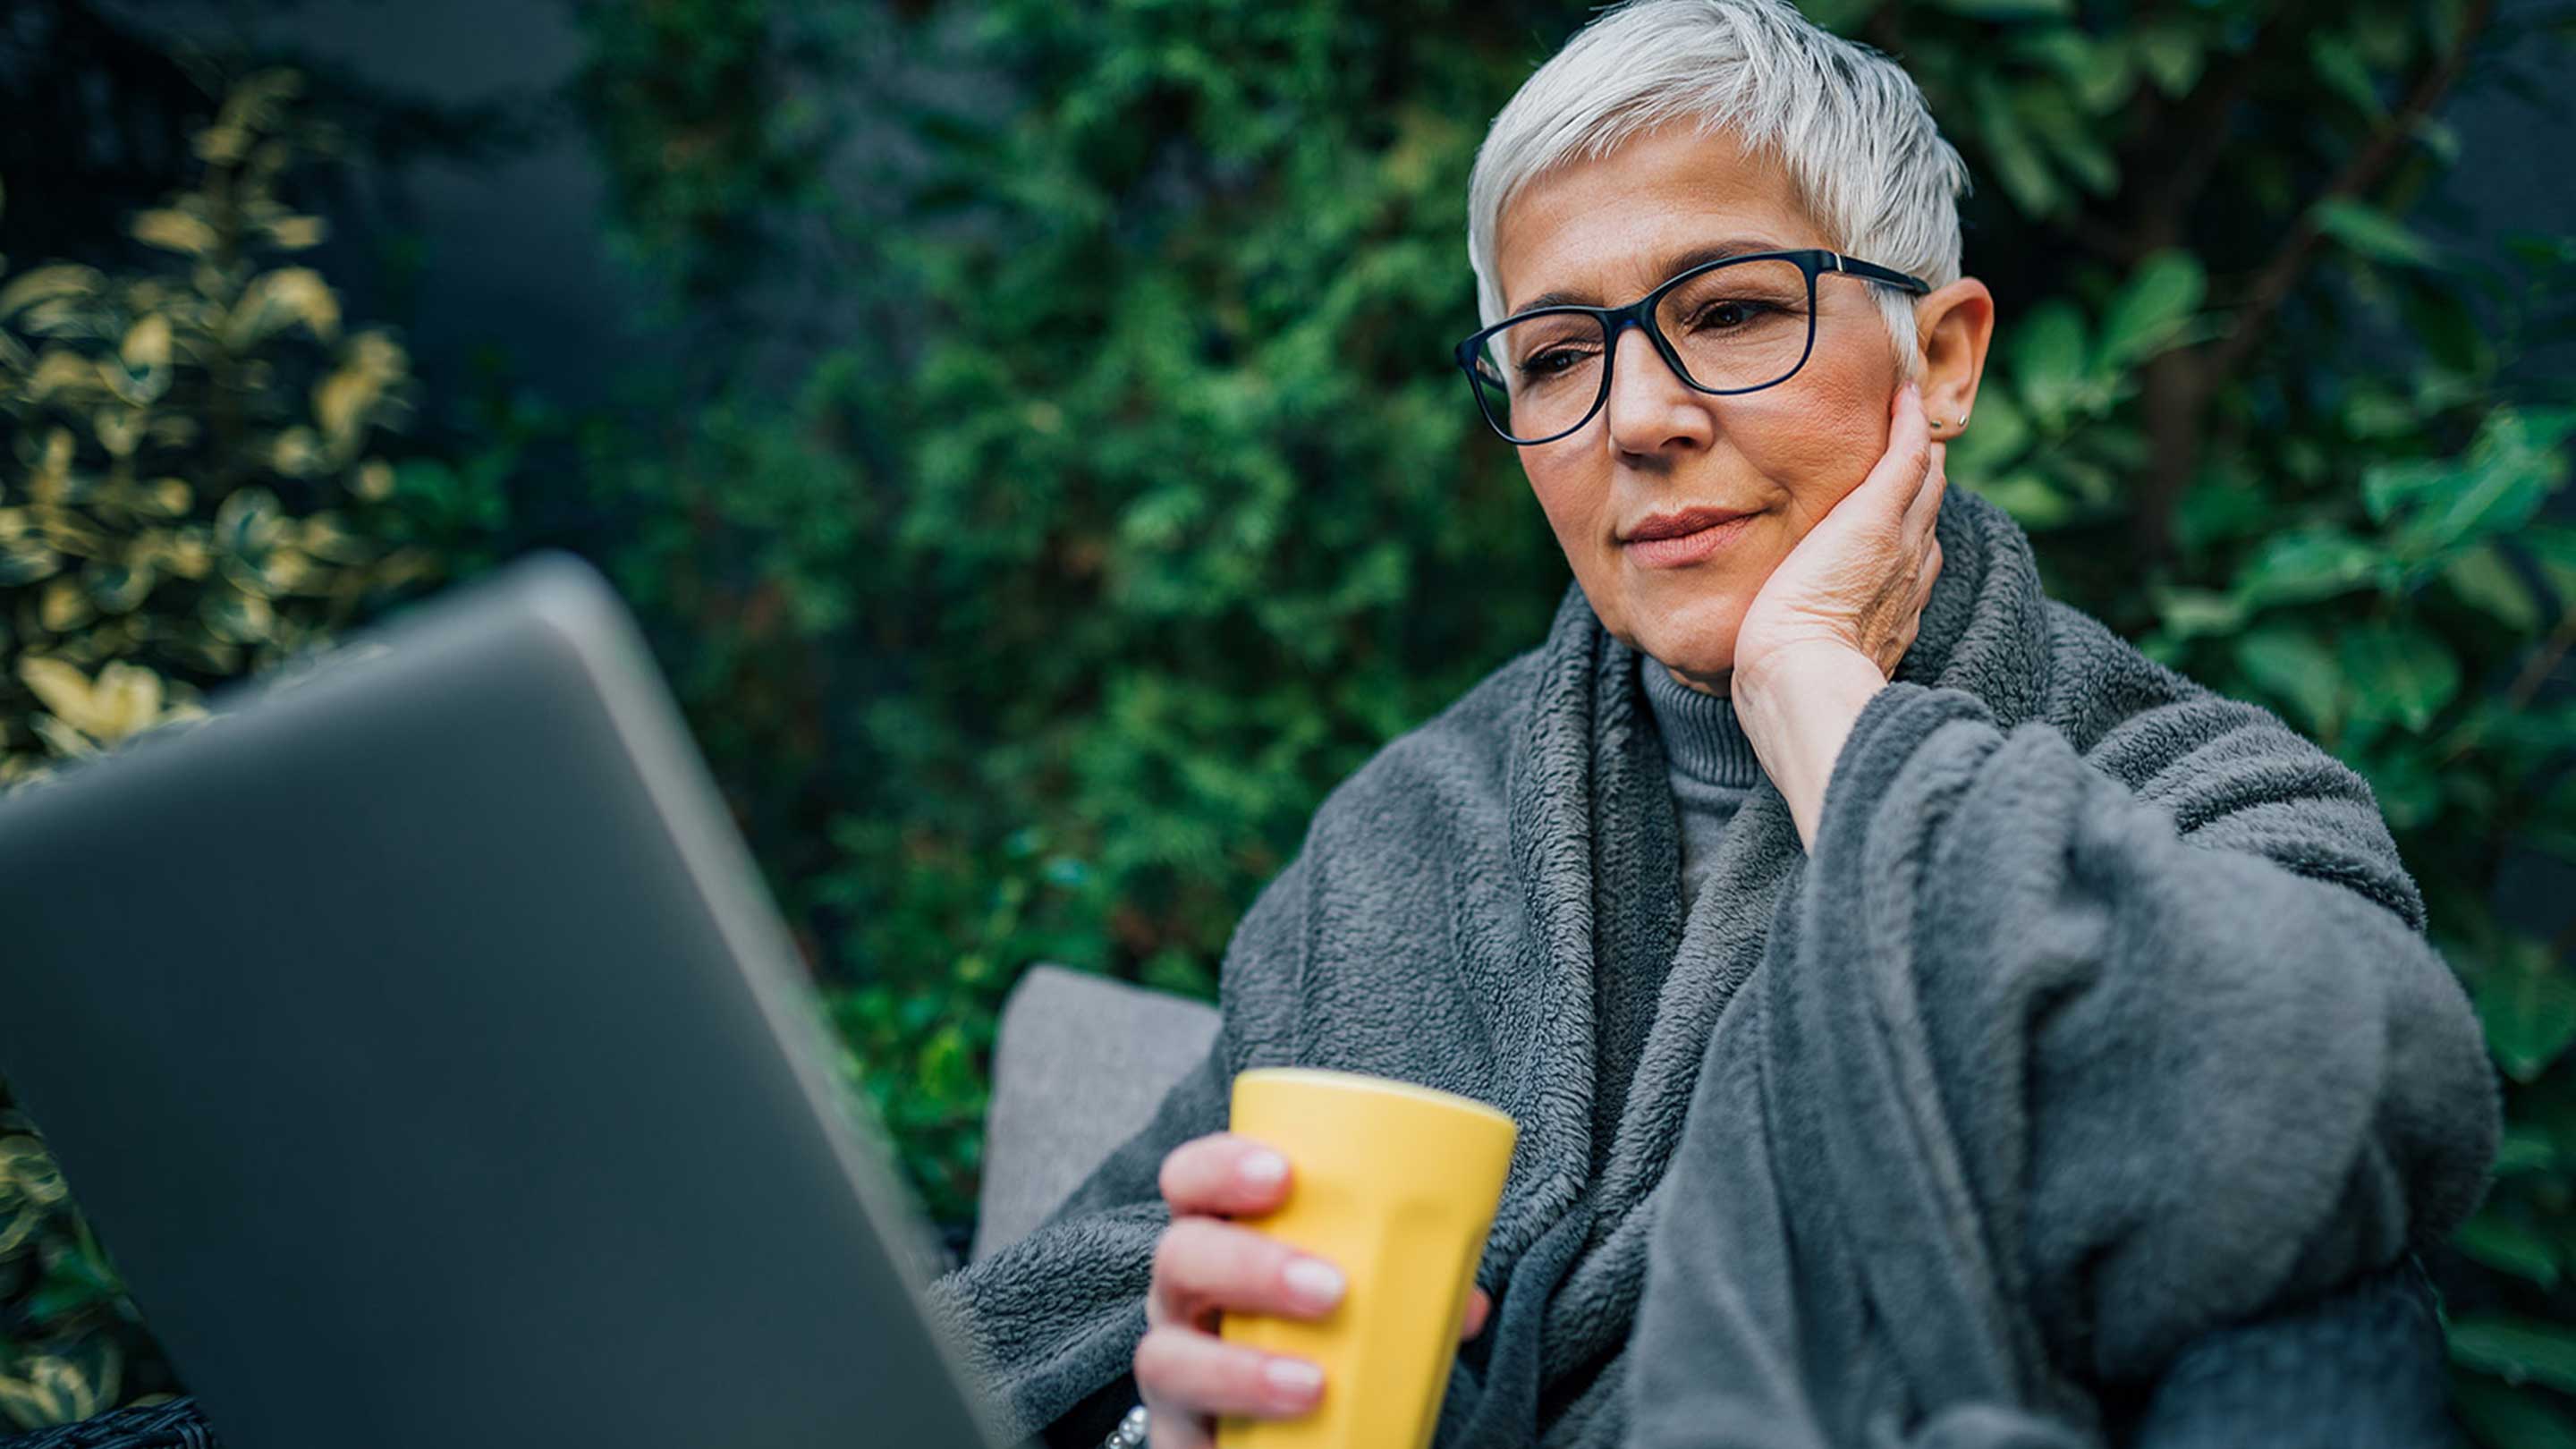 Elderly person on their laptop outdoors